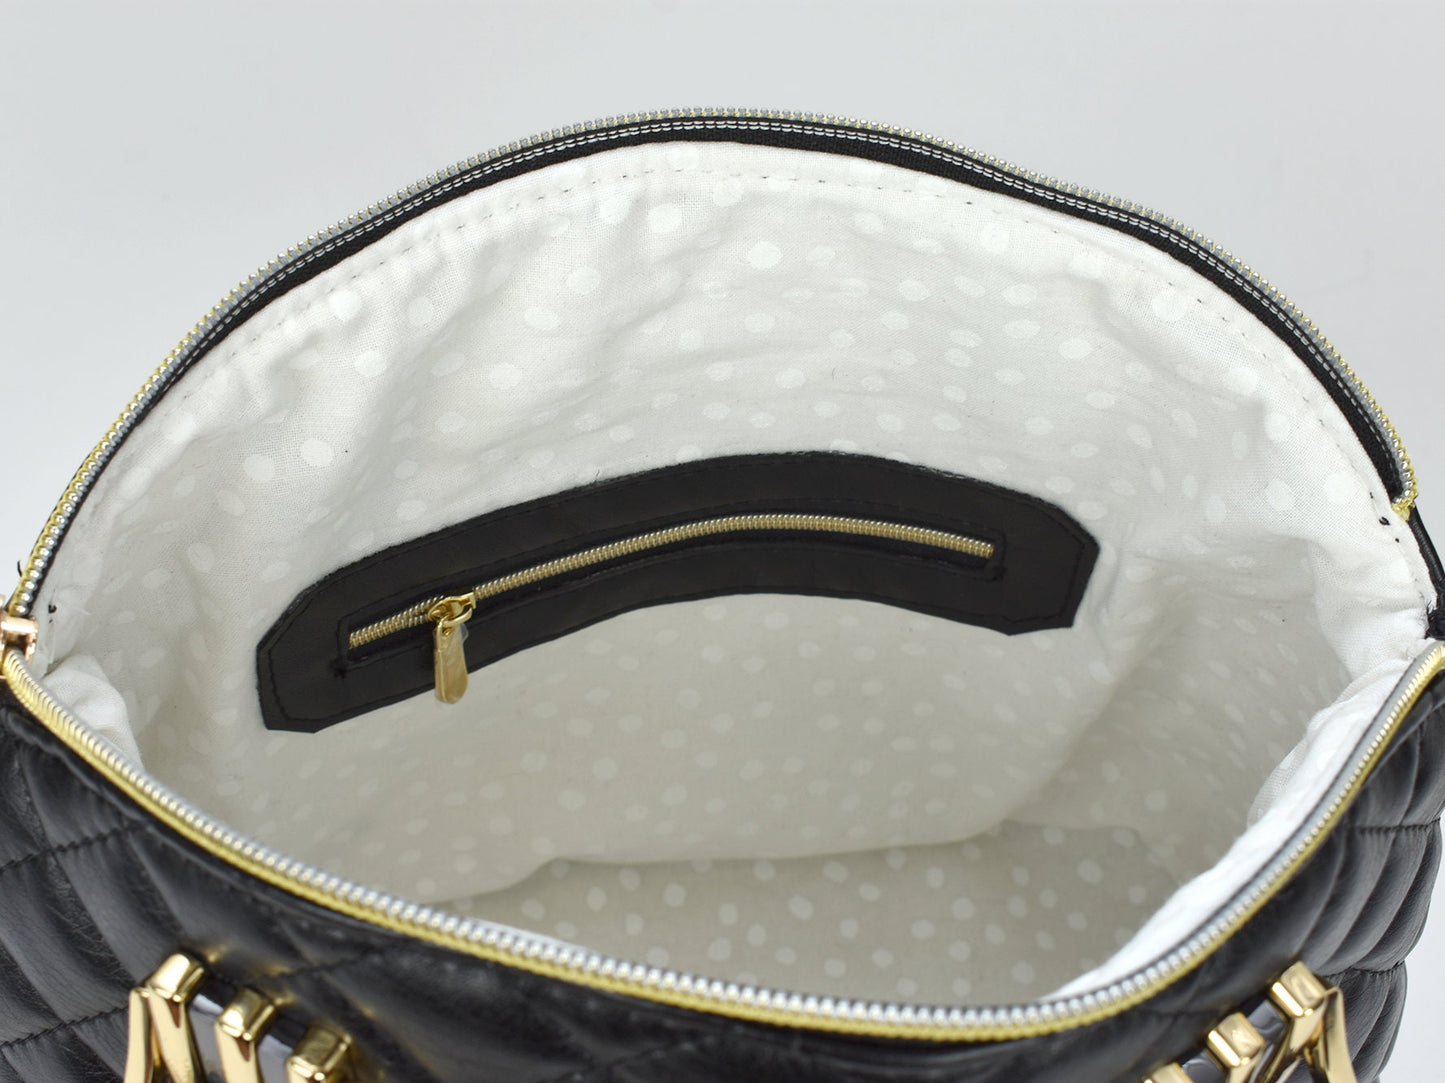 Classic Black Purse - Domed Handbag - Quilted Faux Leather - Stylish Ladies Purse - Gift for Mom